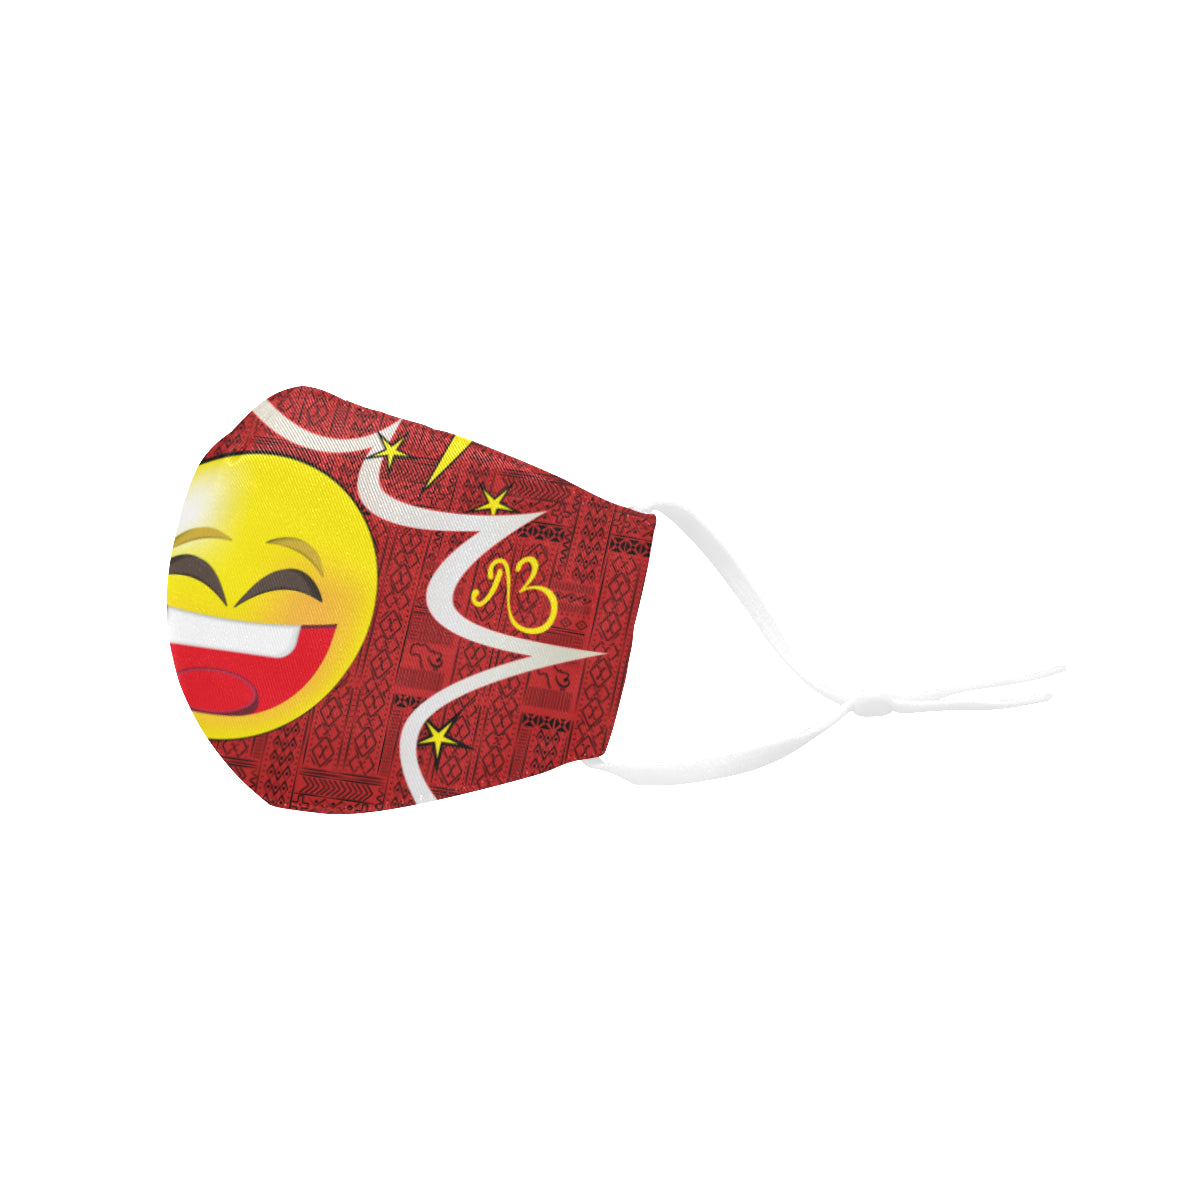 Grin Tribal Print Comic Emoji Cotton Fabric Face Mask with Filter Slot and Adjustable Strap - Non-medical use (2 Filters Included)